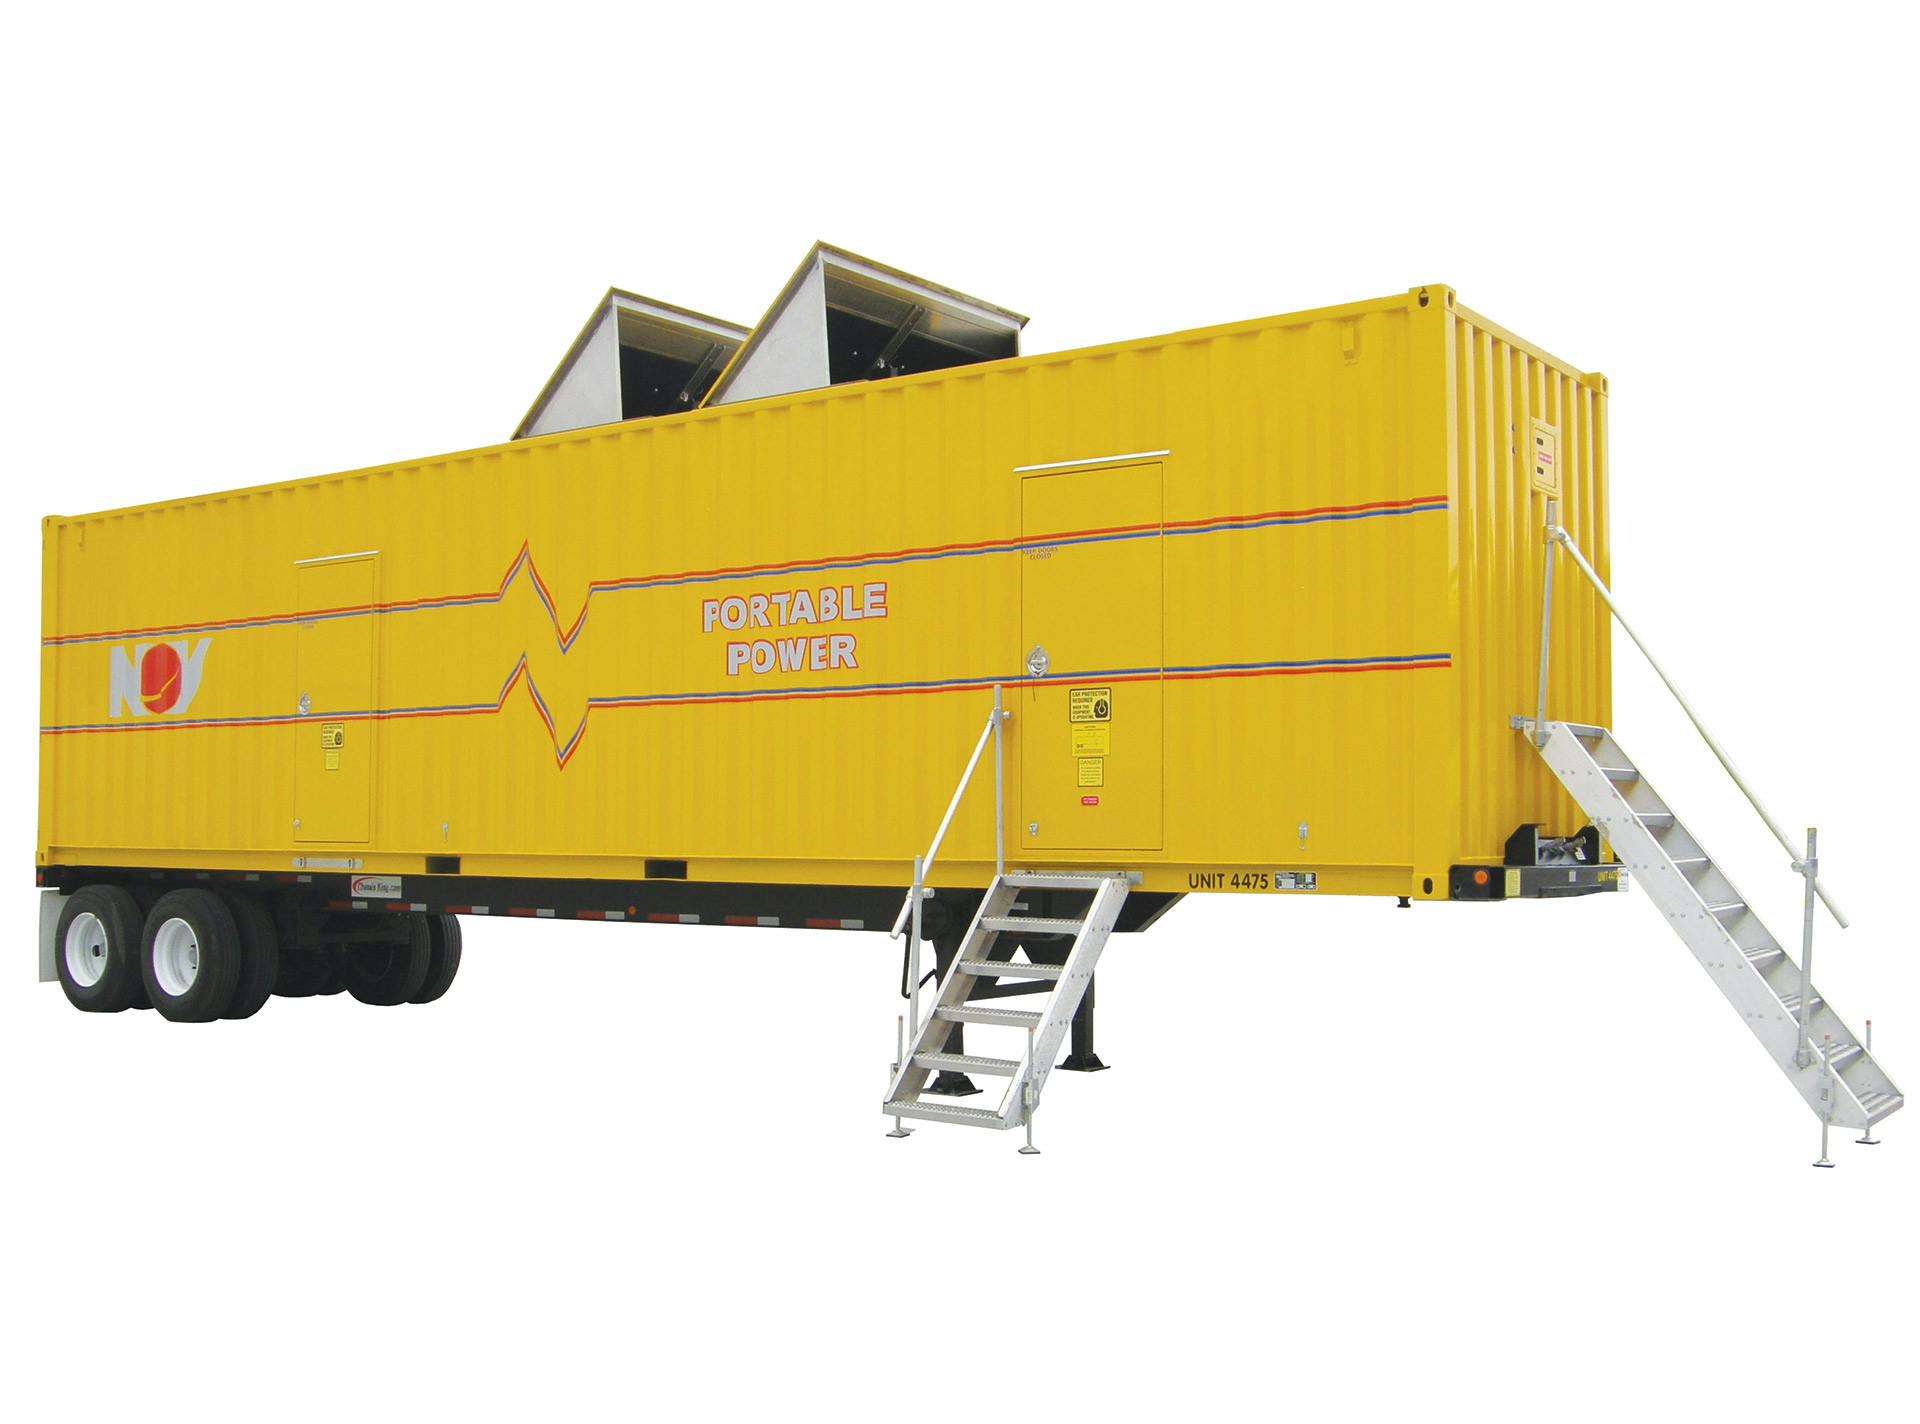 A render of a large portable power generator unit